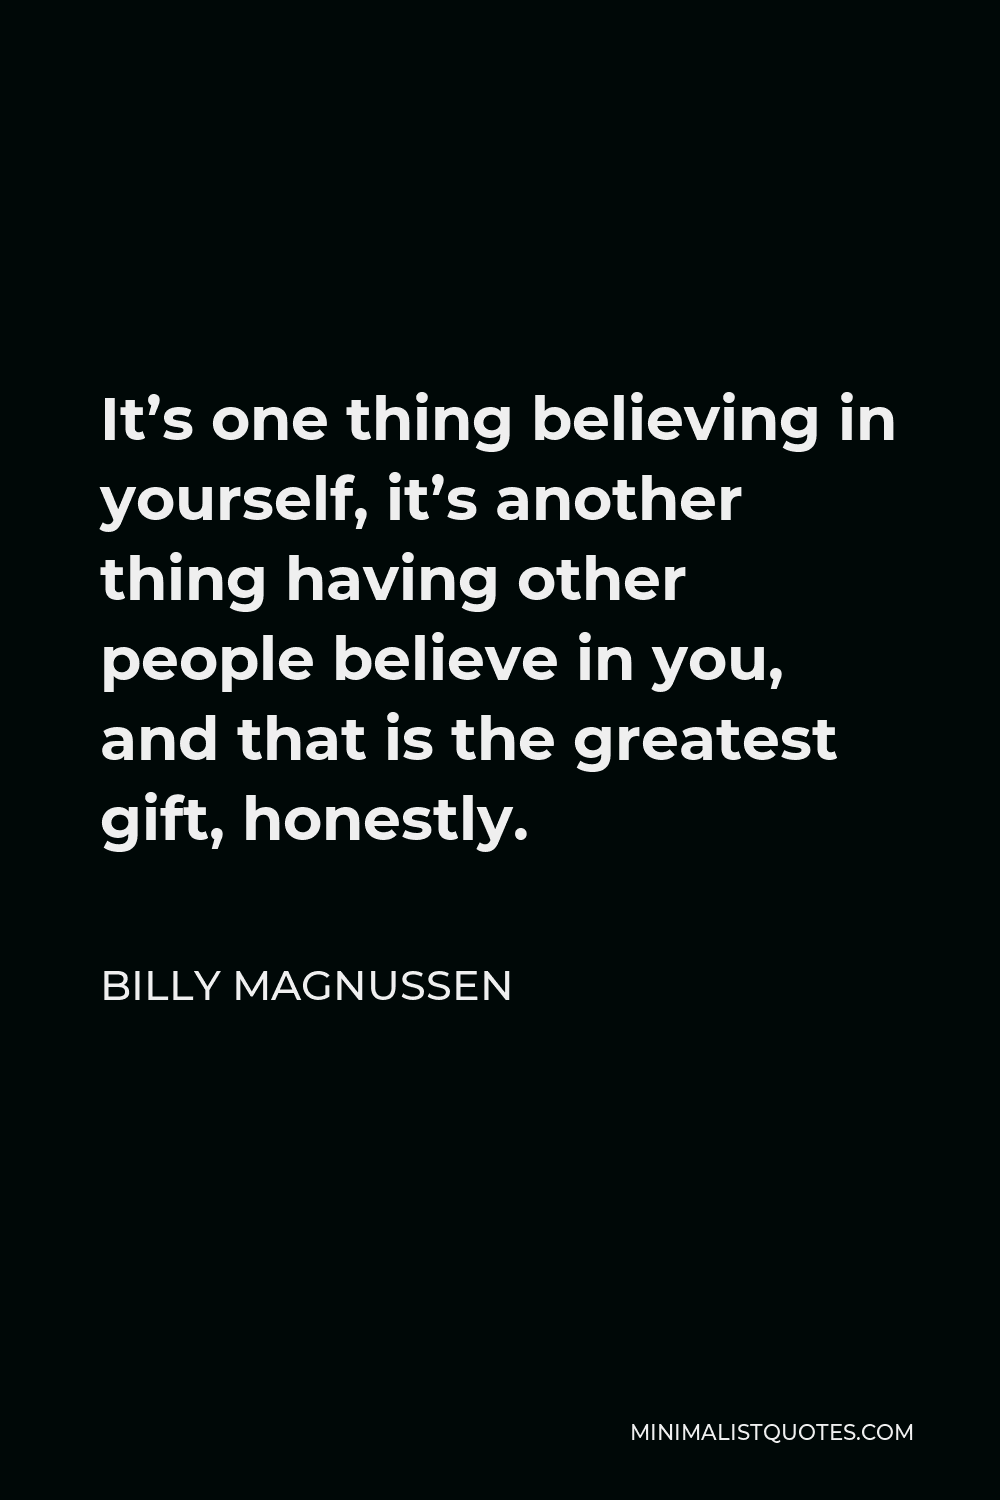 Billy Magnussen Quote - It’s one thing believing in yourself, it’s another thing having other people believe in you, and that is the greatest gift, honestly.